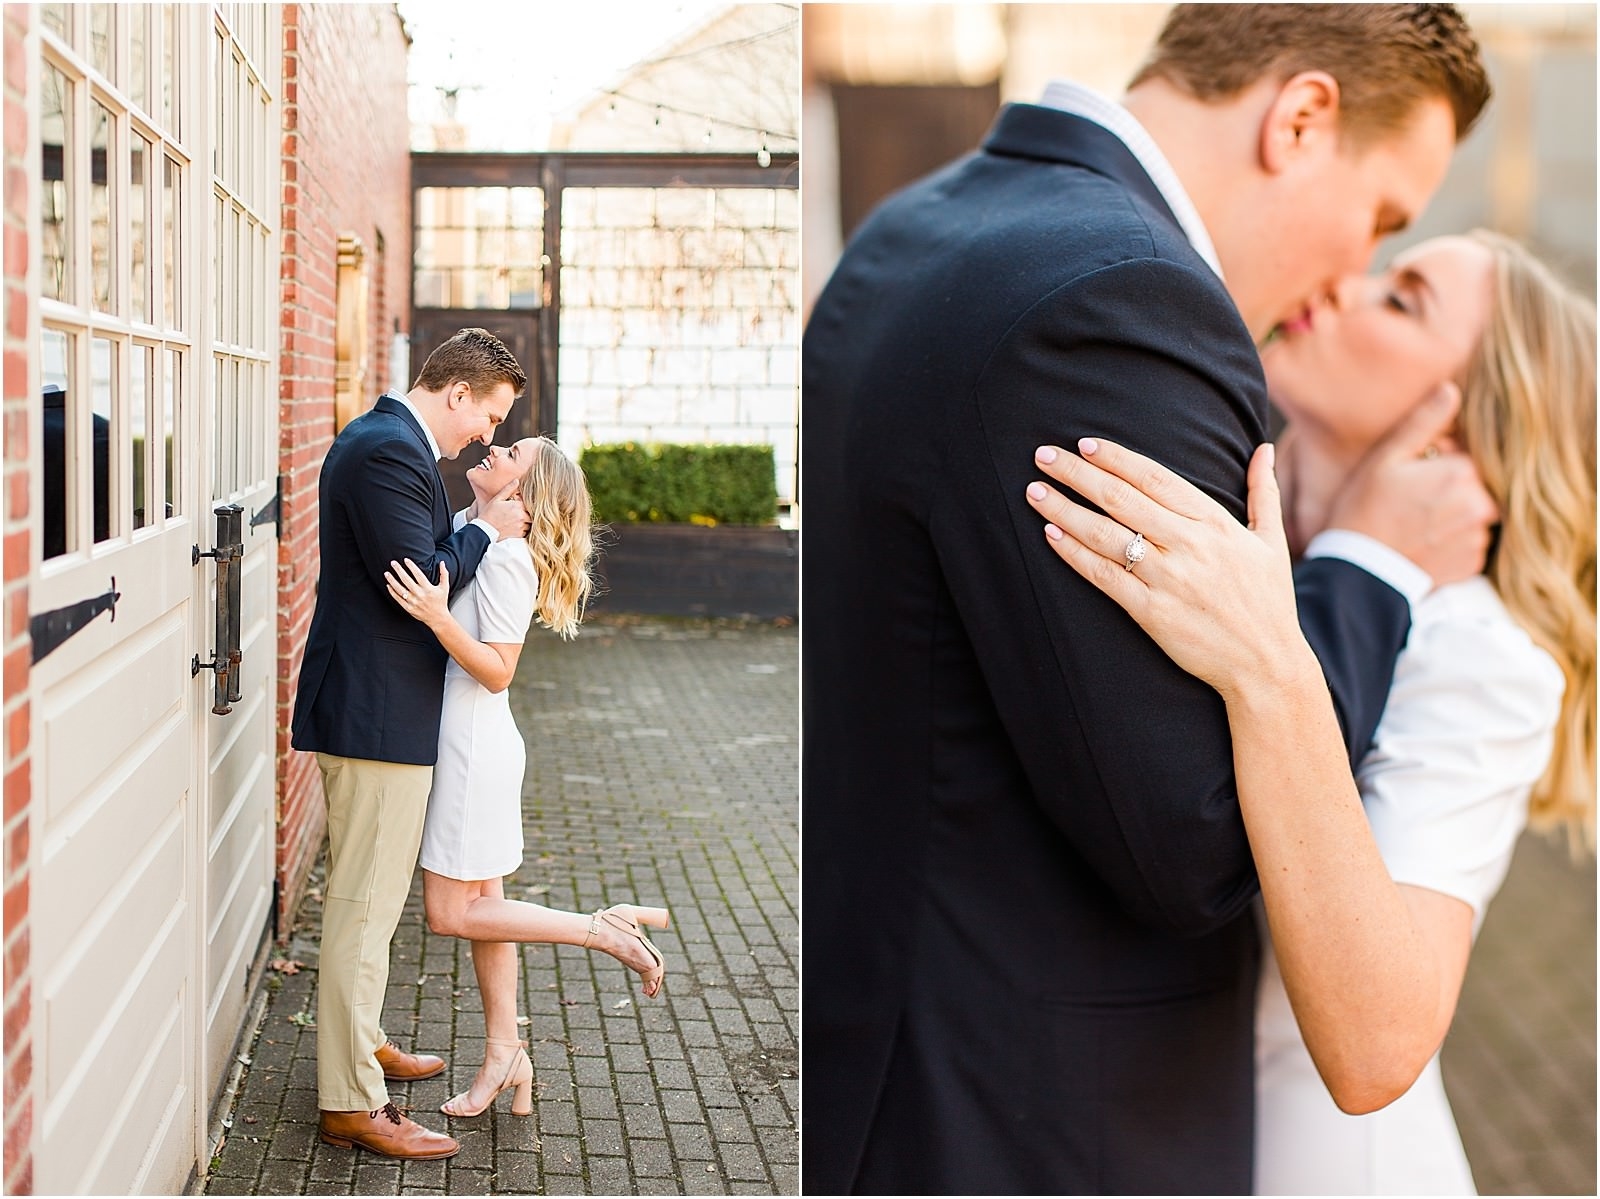 The Best of Engagement Sessions 2020 Recap0054.jpg